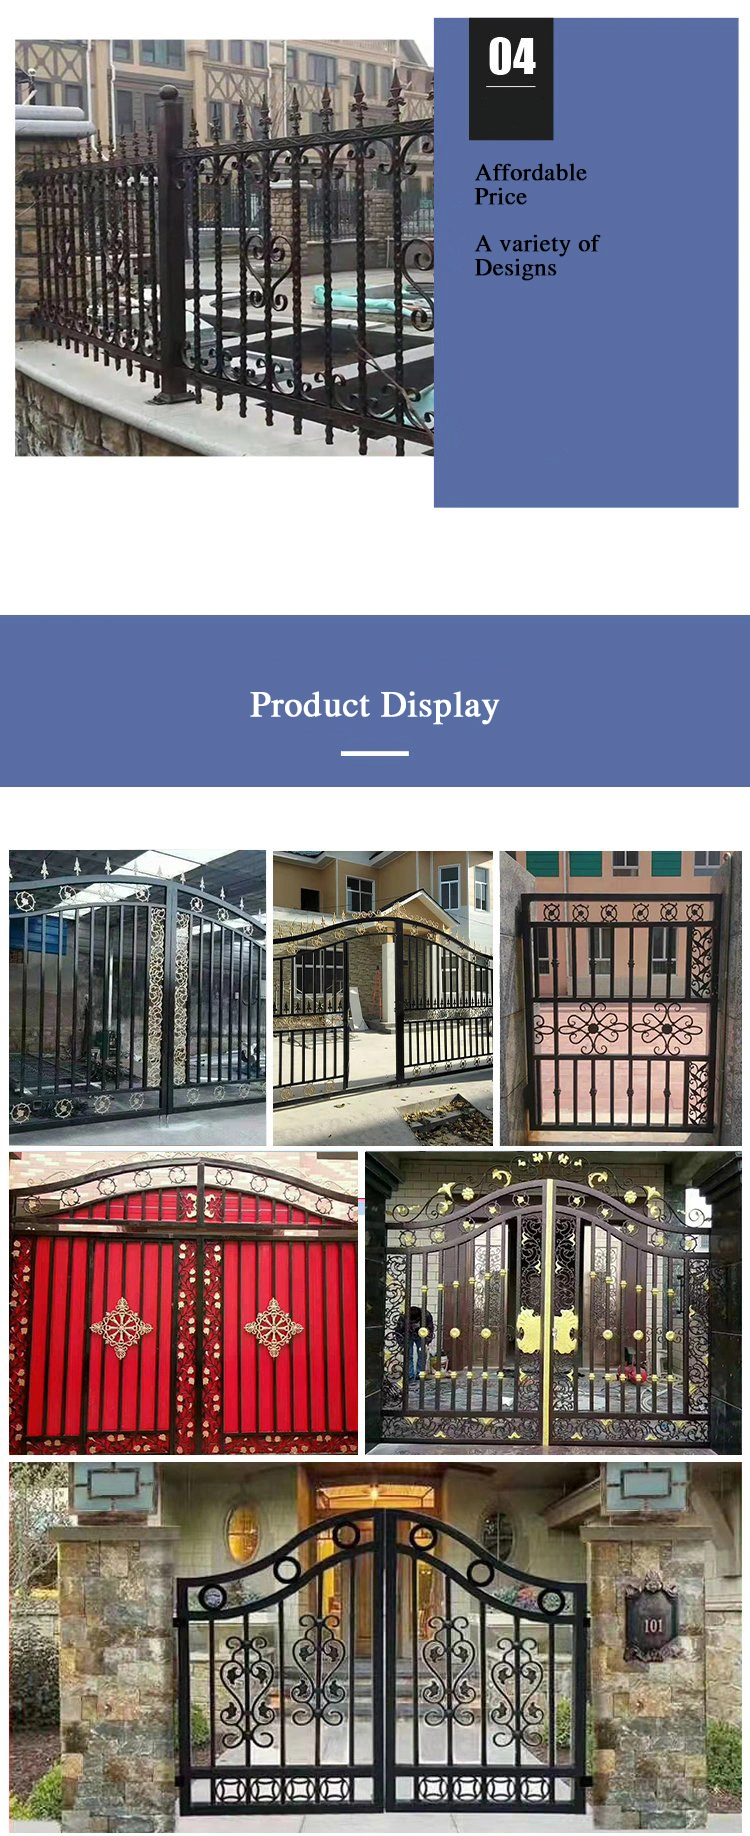 Multicolor Residential and Commercial Ornamental Wrought Iron Metal Garden Fencing Iron Gates